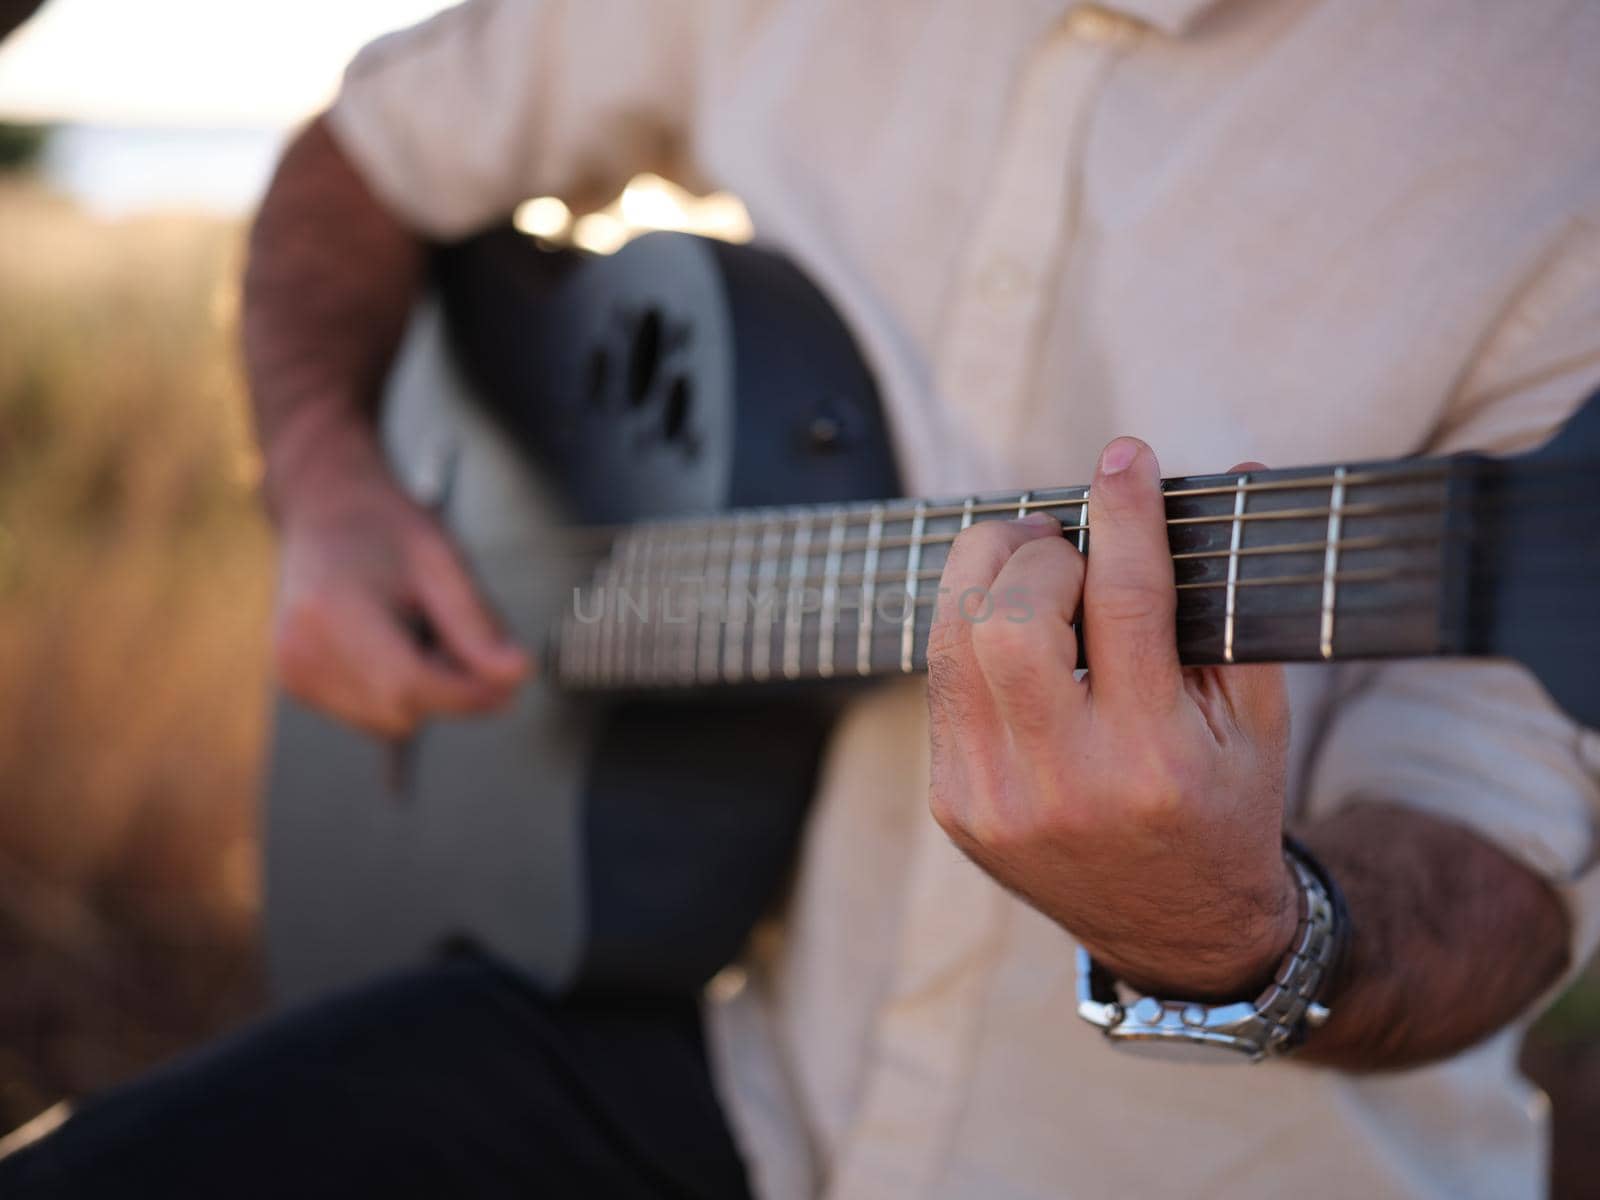 focusing on hands while playing the guitar, male person with shirt and watch, blurred background